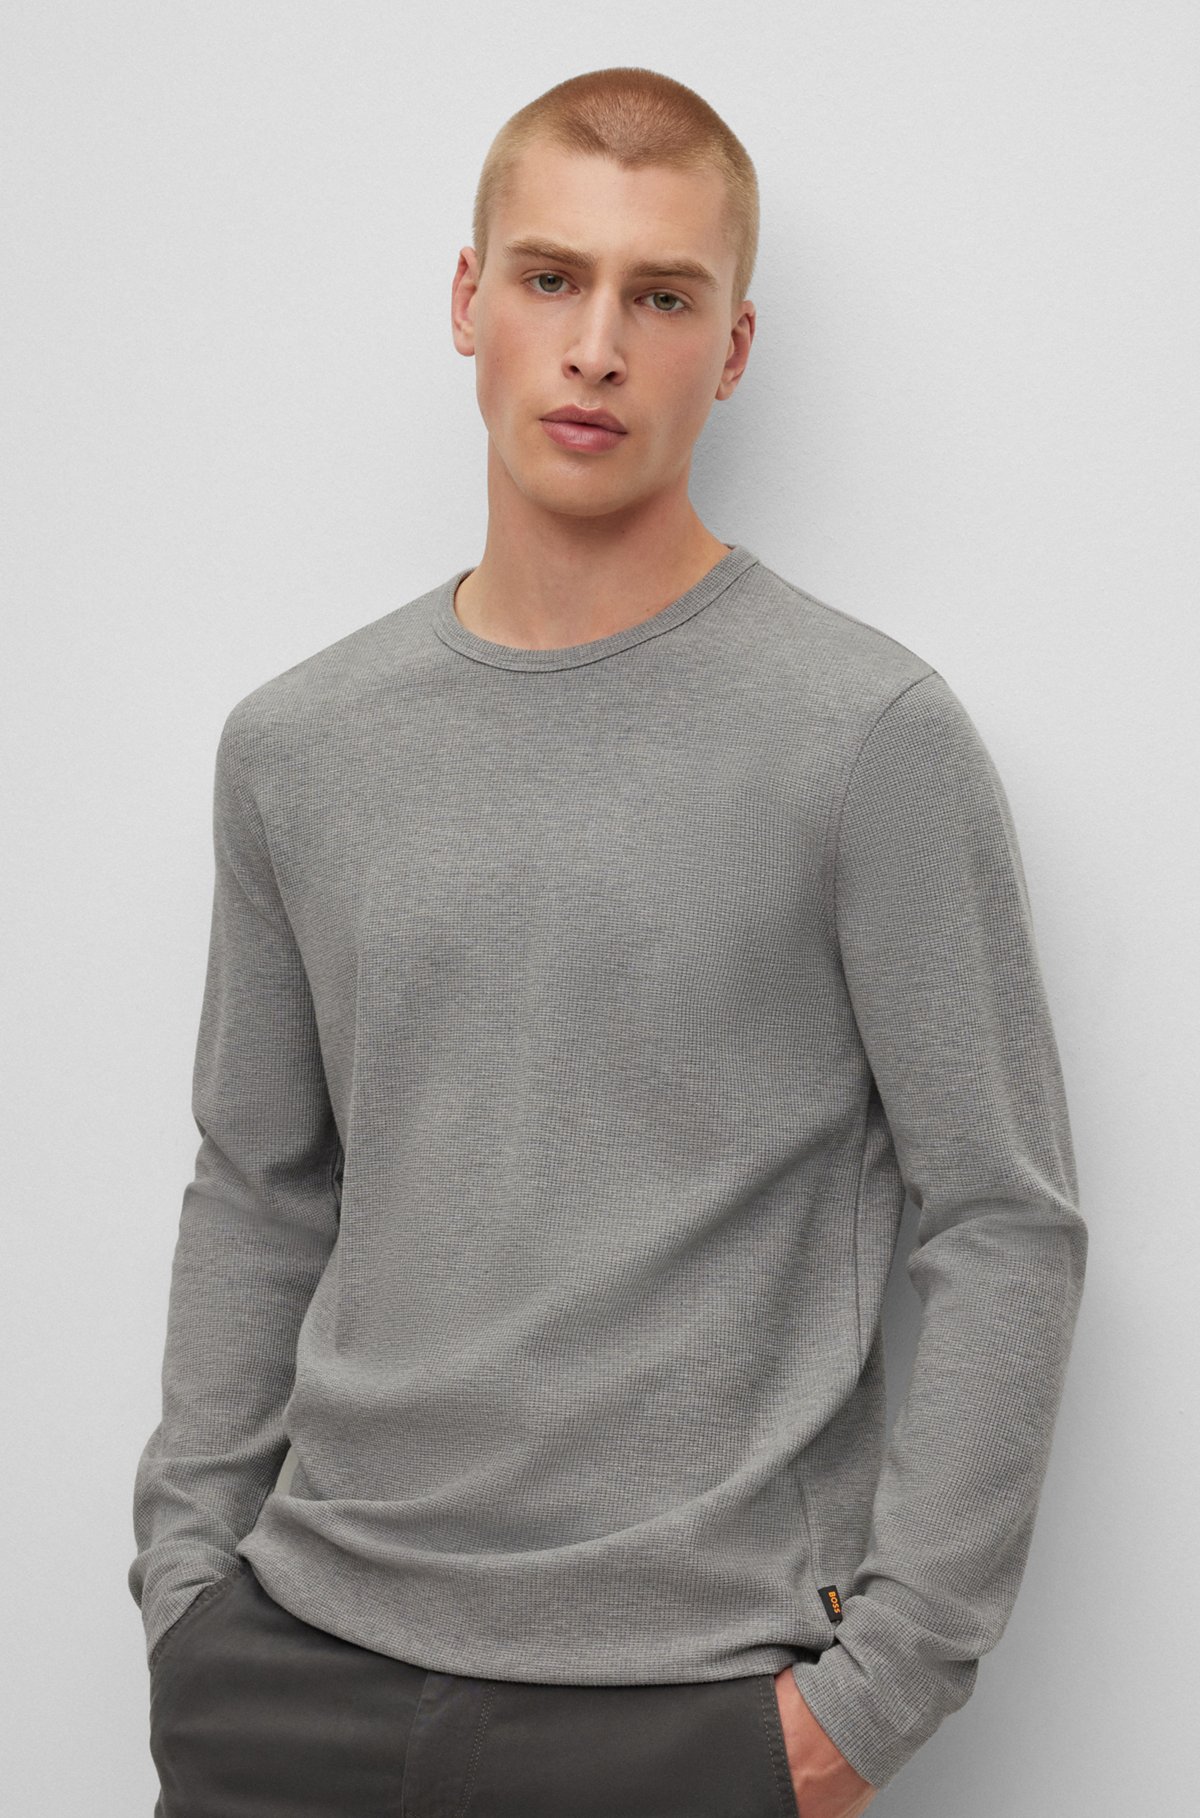 Long-sleeved T-shirt in a waffle-structured cotton blend, Grey